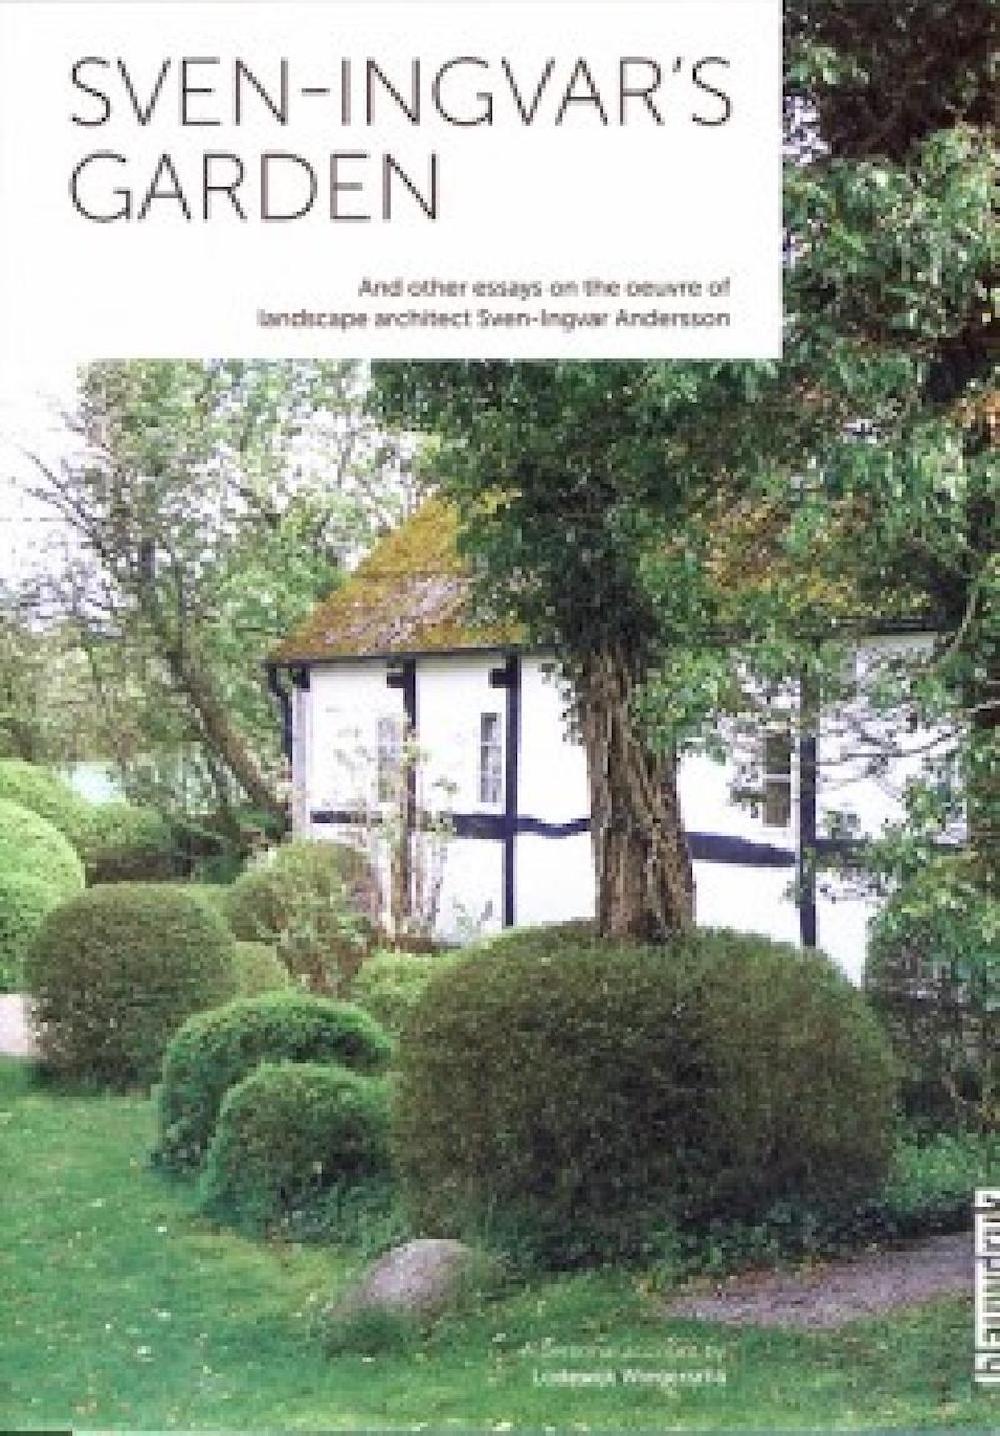 Sven Ingvar's Garden - And Other Essays on the Oeuvre of Landscape Architect Sven-Ingvar Andersson